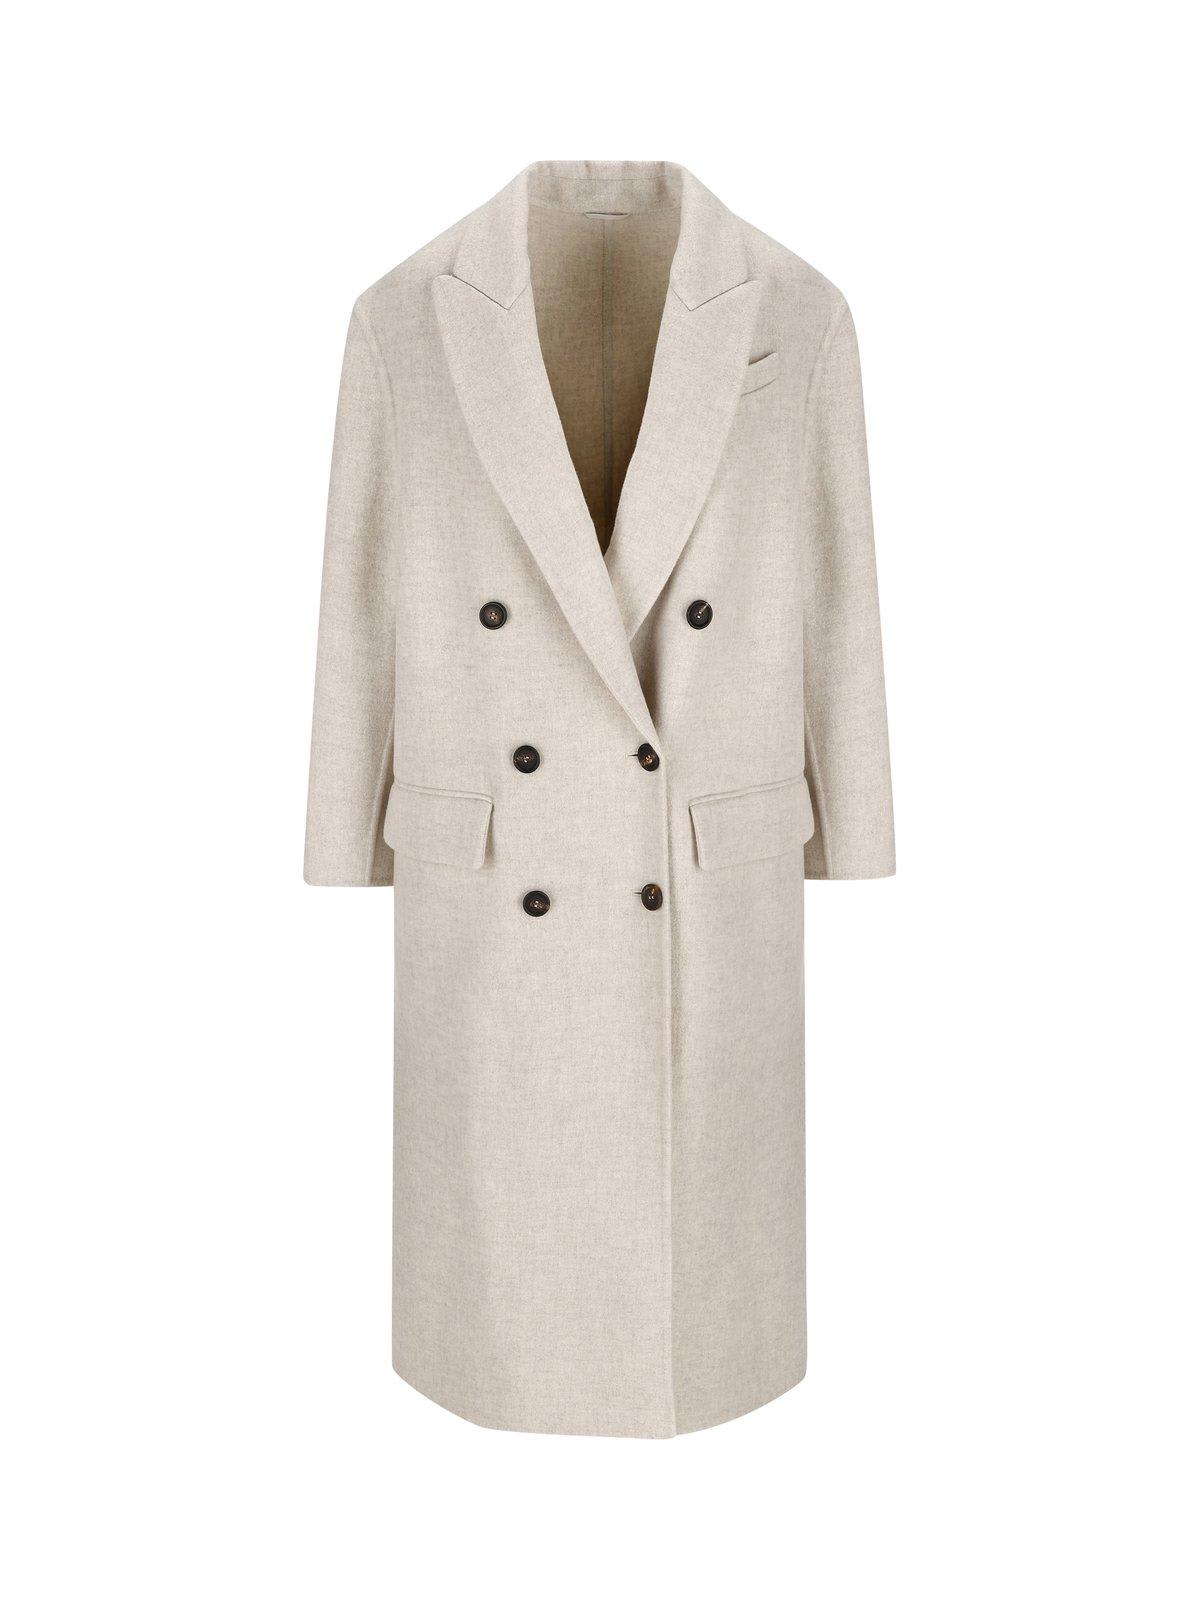 BRUNELLO CUCINELLI DOUBLE-BREASTED MID-LENGTH COAT